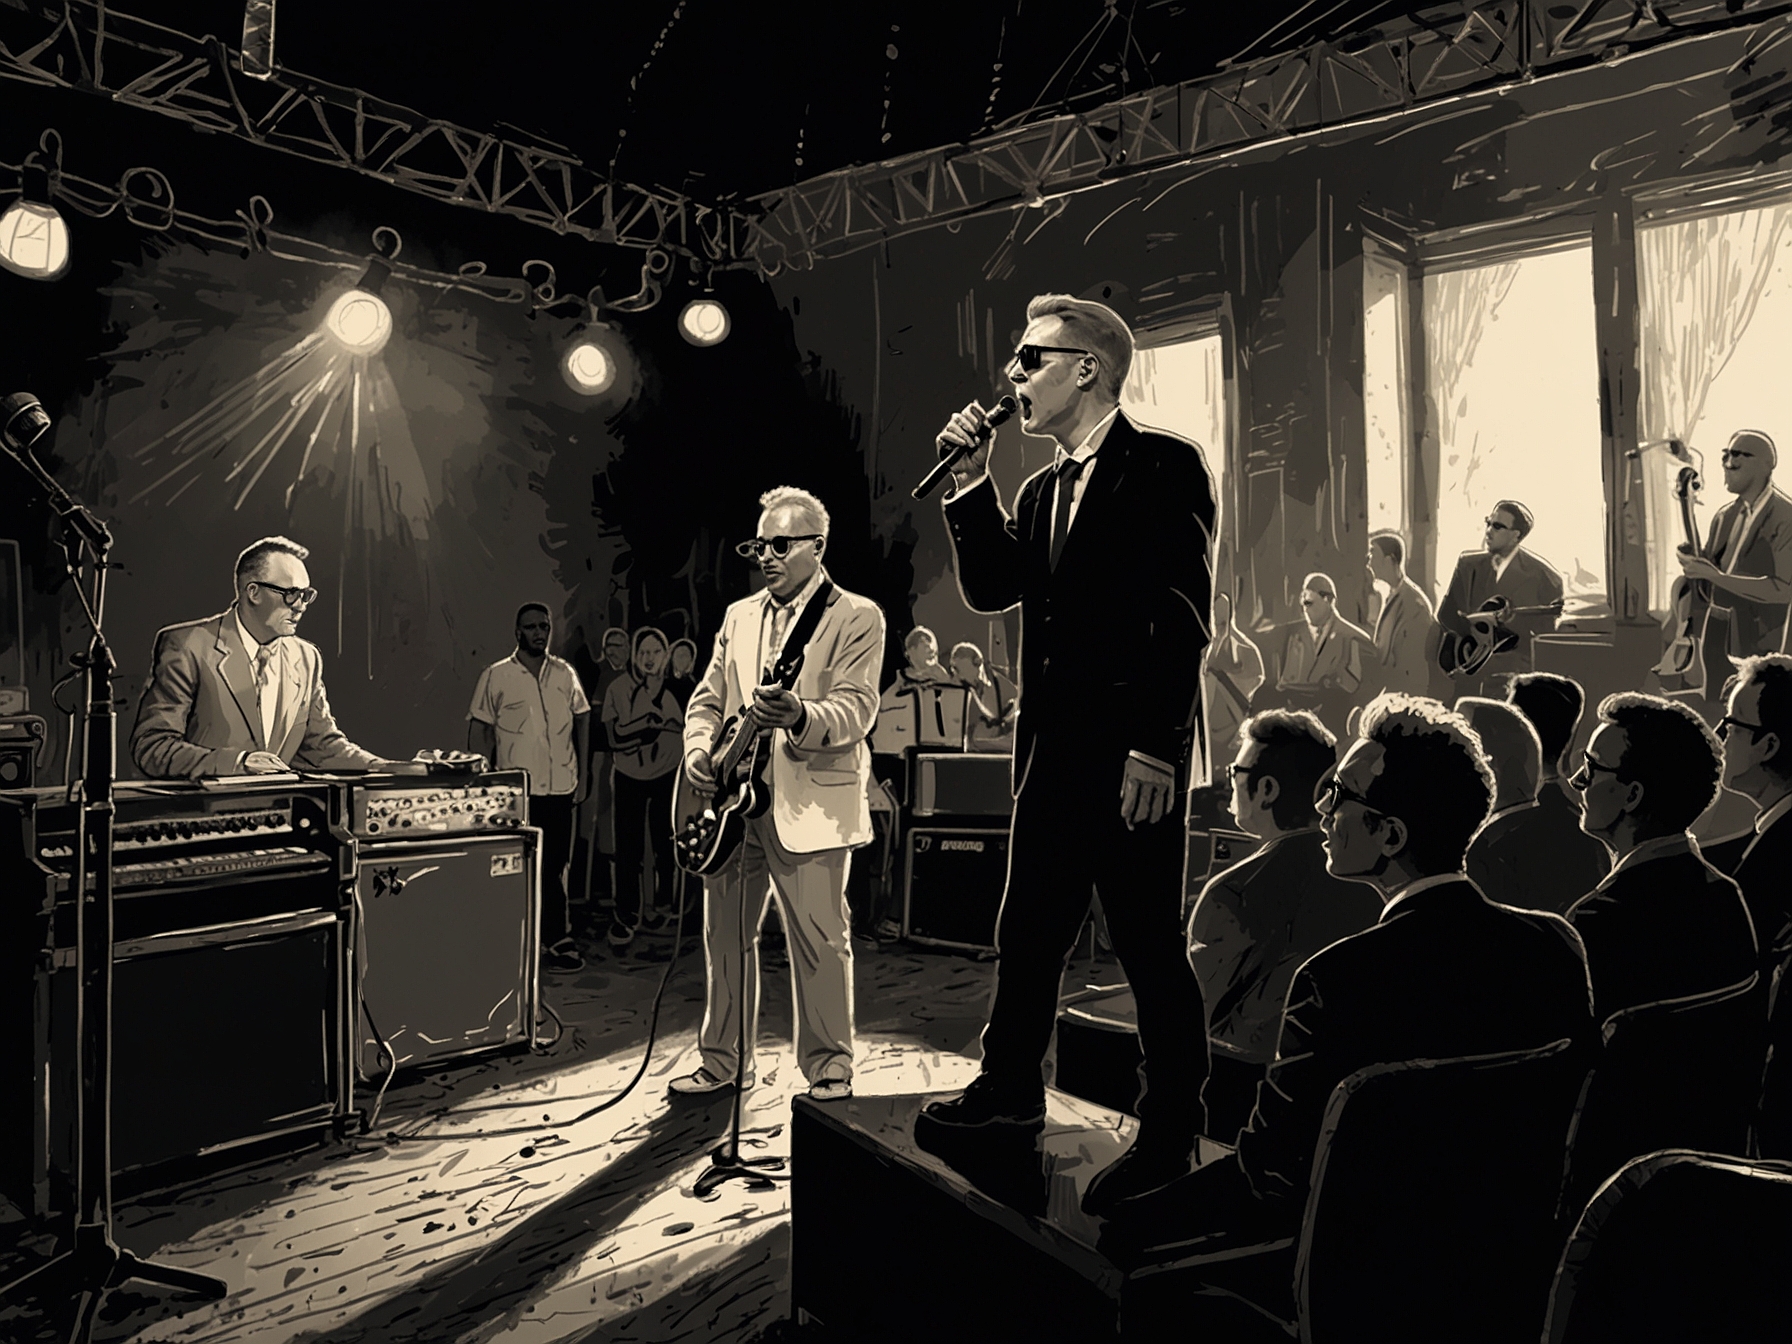 A vibrant concert scene with Soul Coughing on stage, captivating the audience with their unique blend of jazz, hip-hop, and beat poetry.